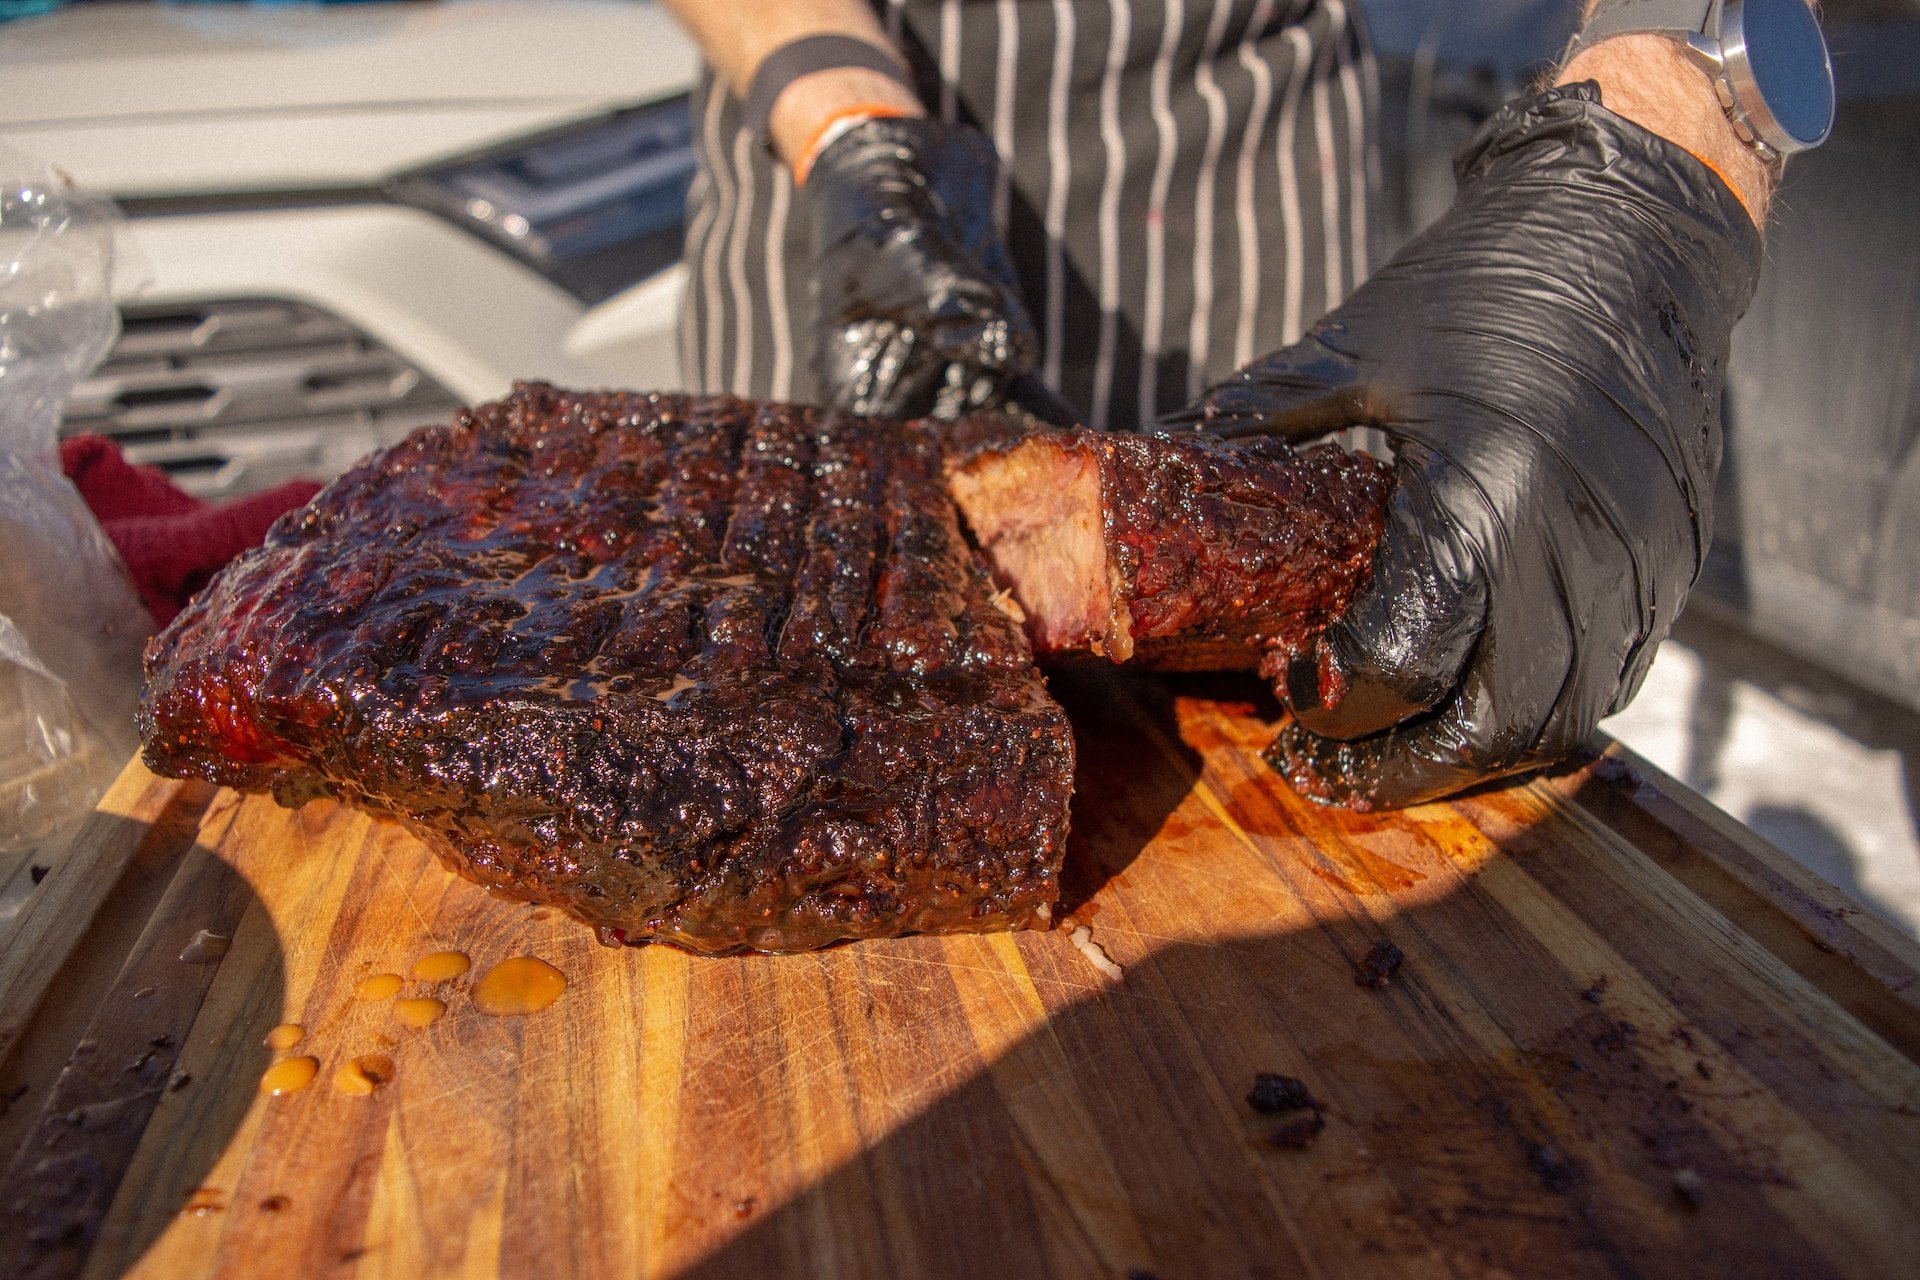 gloved hand holding a smoked brisket on a cutting board